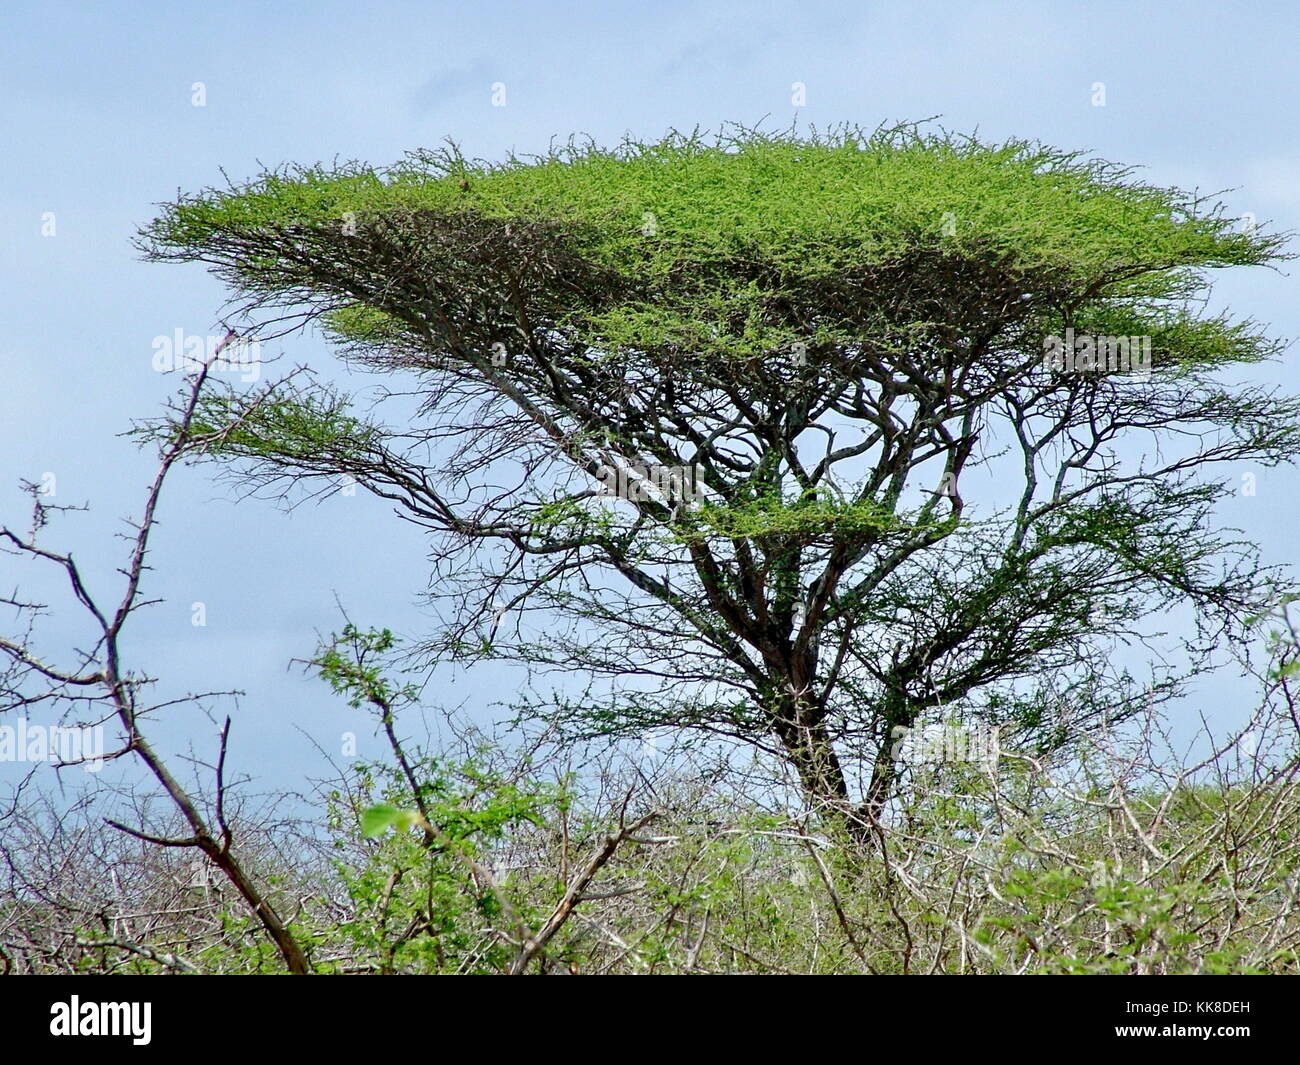 Umbrella thorn tree in Kruger National Park, South Africa Stock Photo